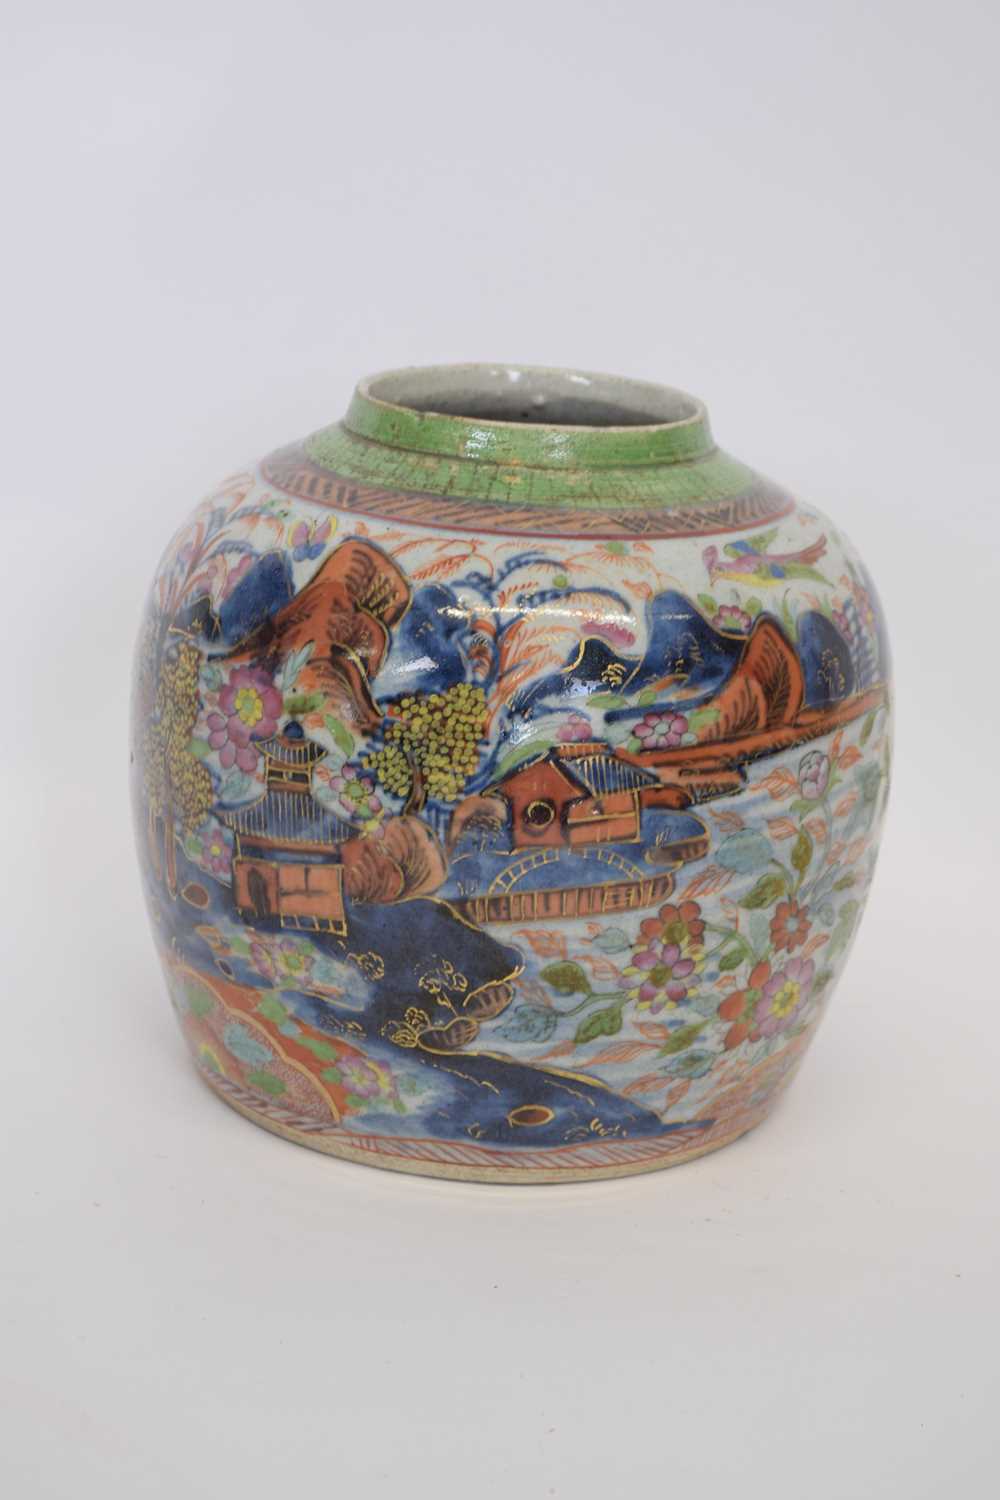 Late 18th/early 19th century Chinese porcelain ginger jar with overglaze European decoration - Image 2 of 6